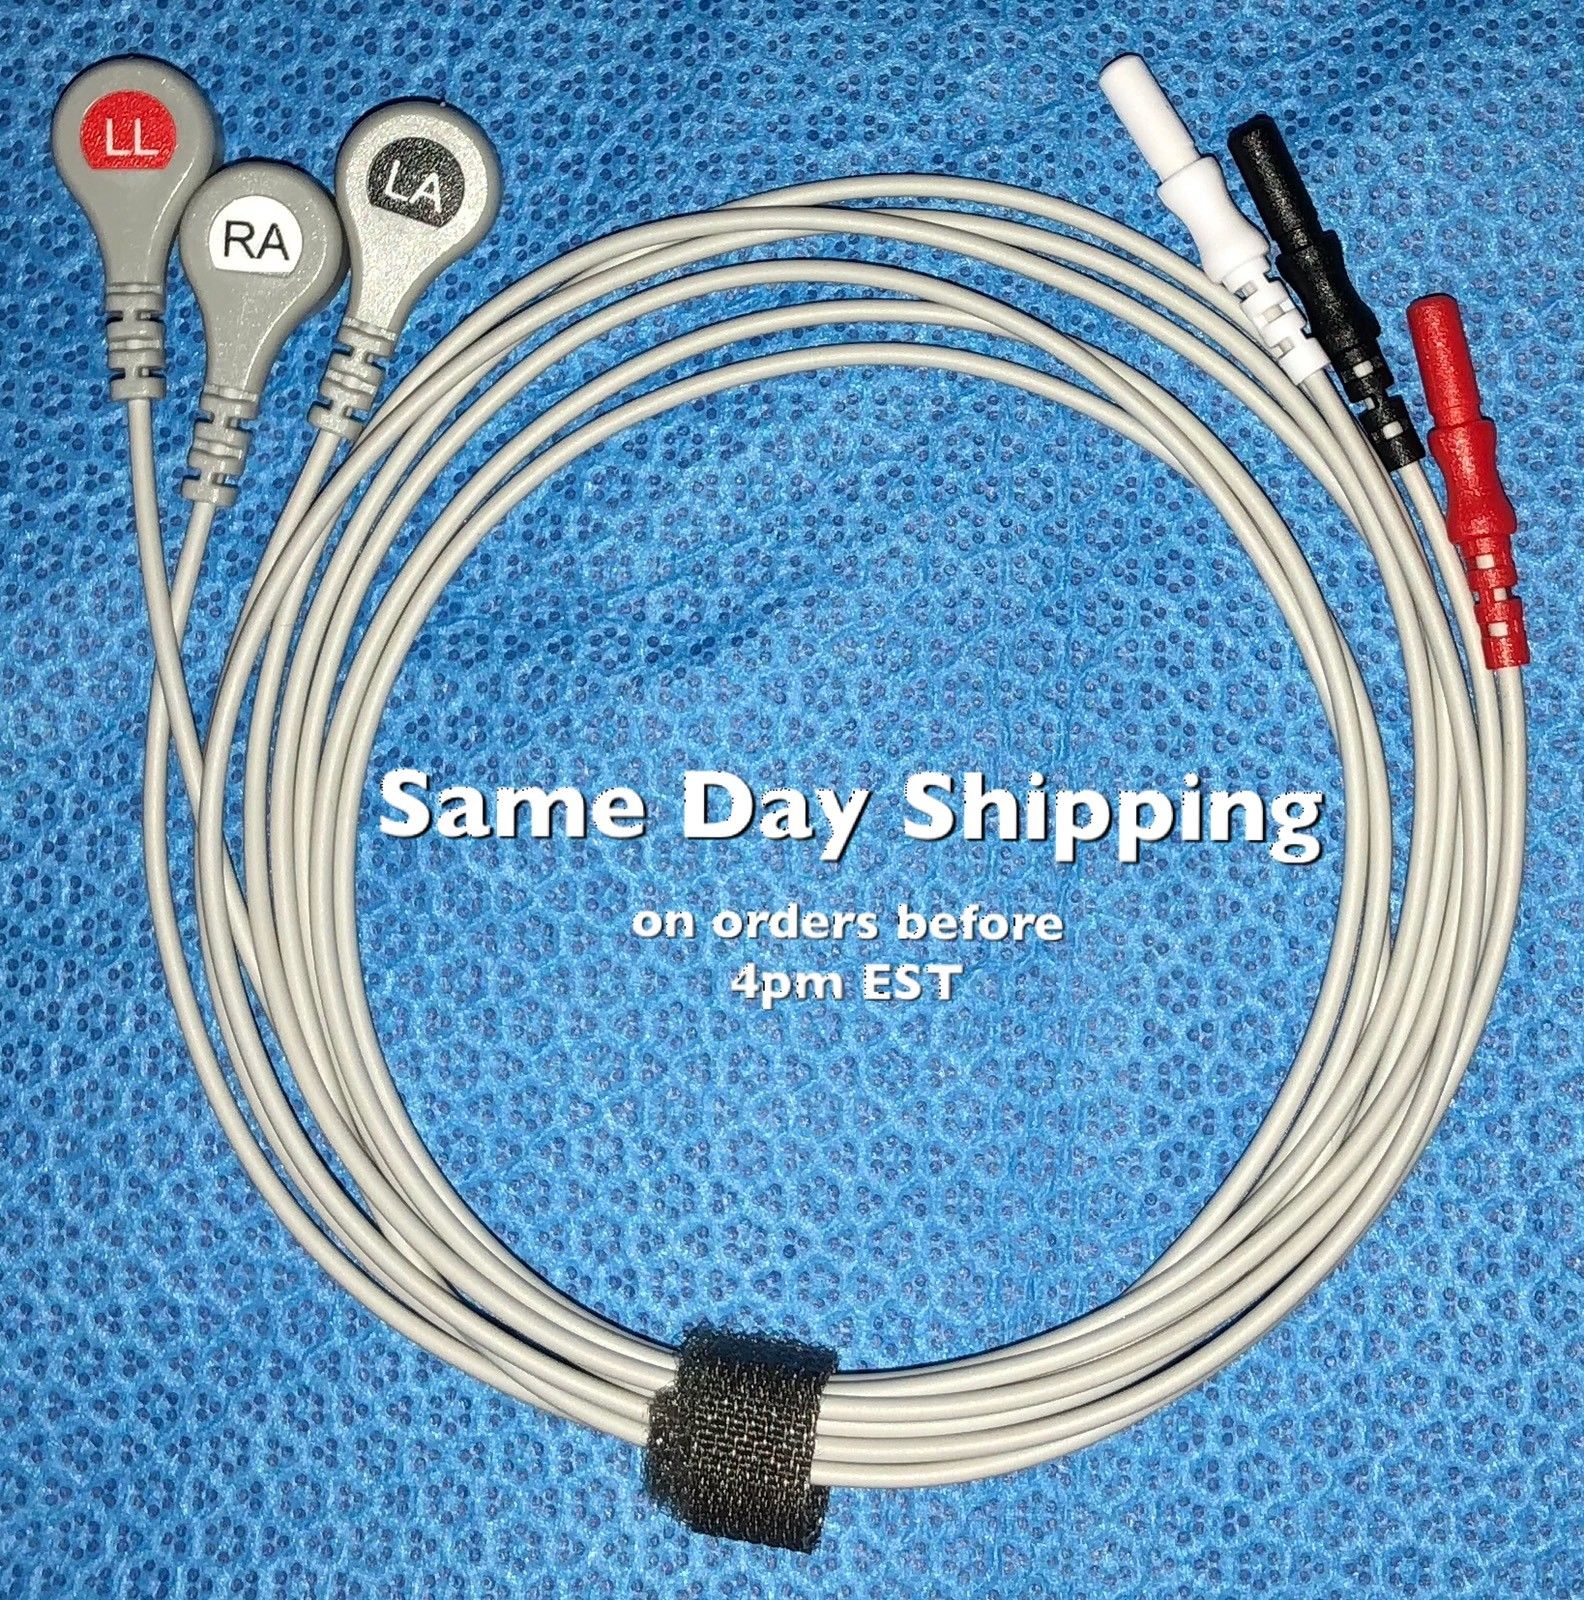 ECG Leadwire Holter Recorder 3 Leads Snap - Same Day Shipping - US Located DIAGNOSTIC ULTRASOUND MACHINES FOR SALE